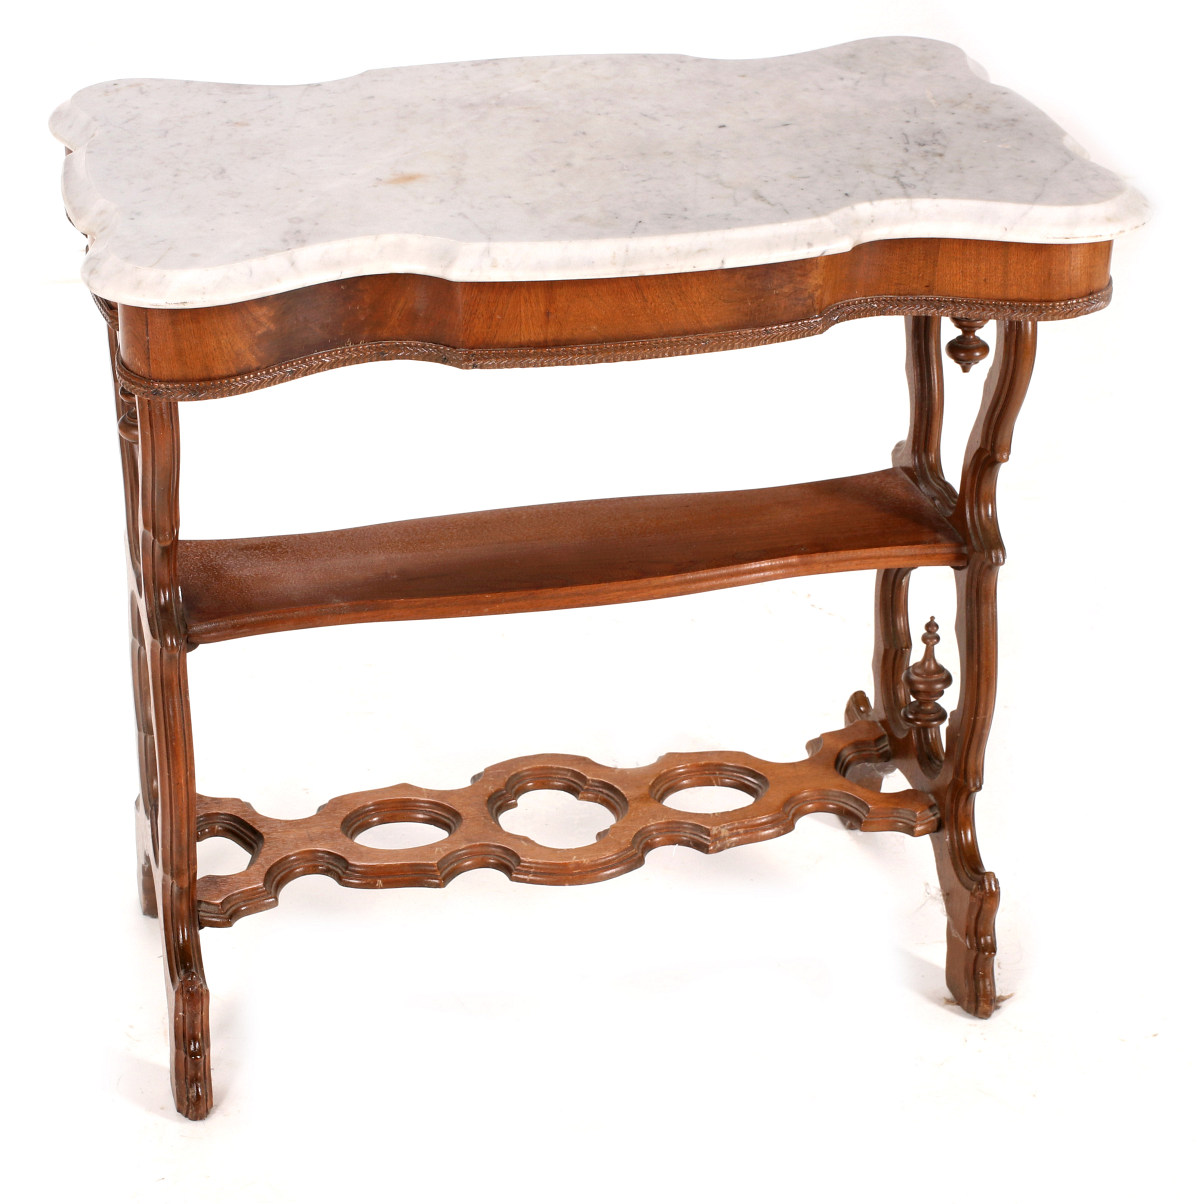 AN EARLY VICTORIAN SIDE TABLE WITH MARBLE TOP